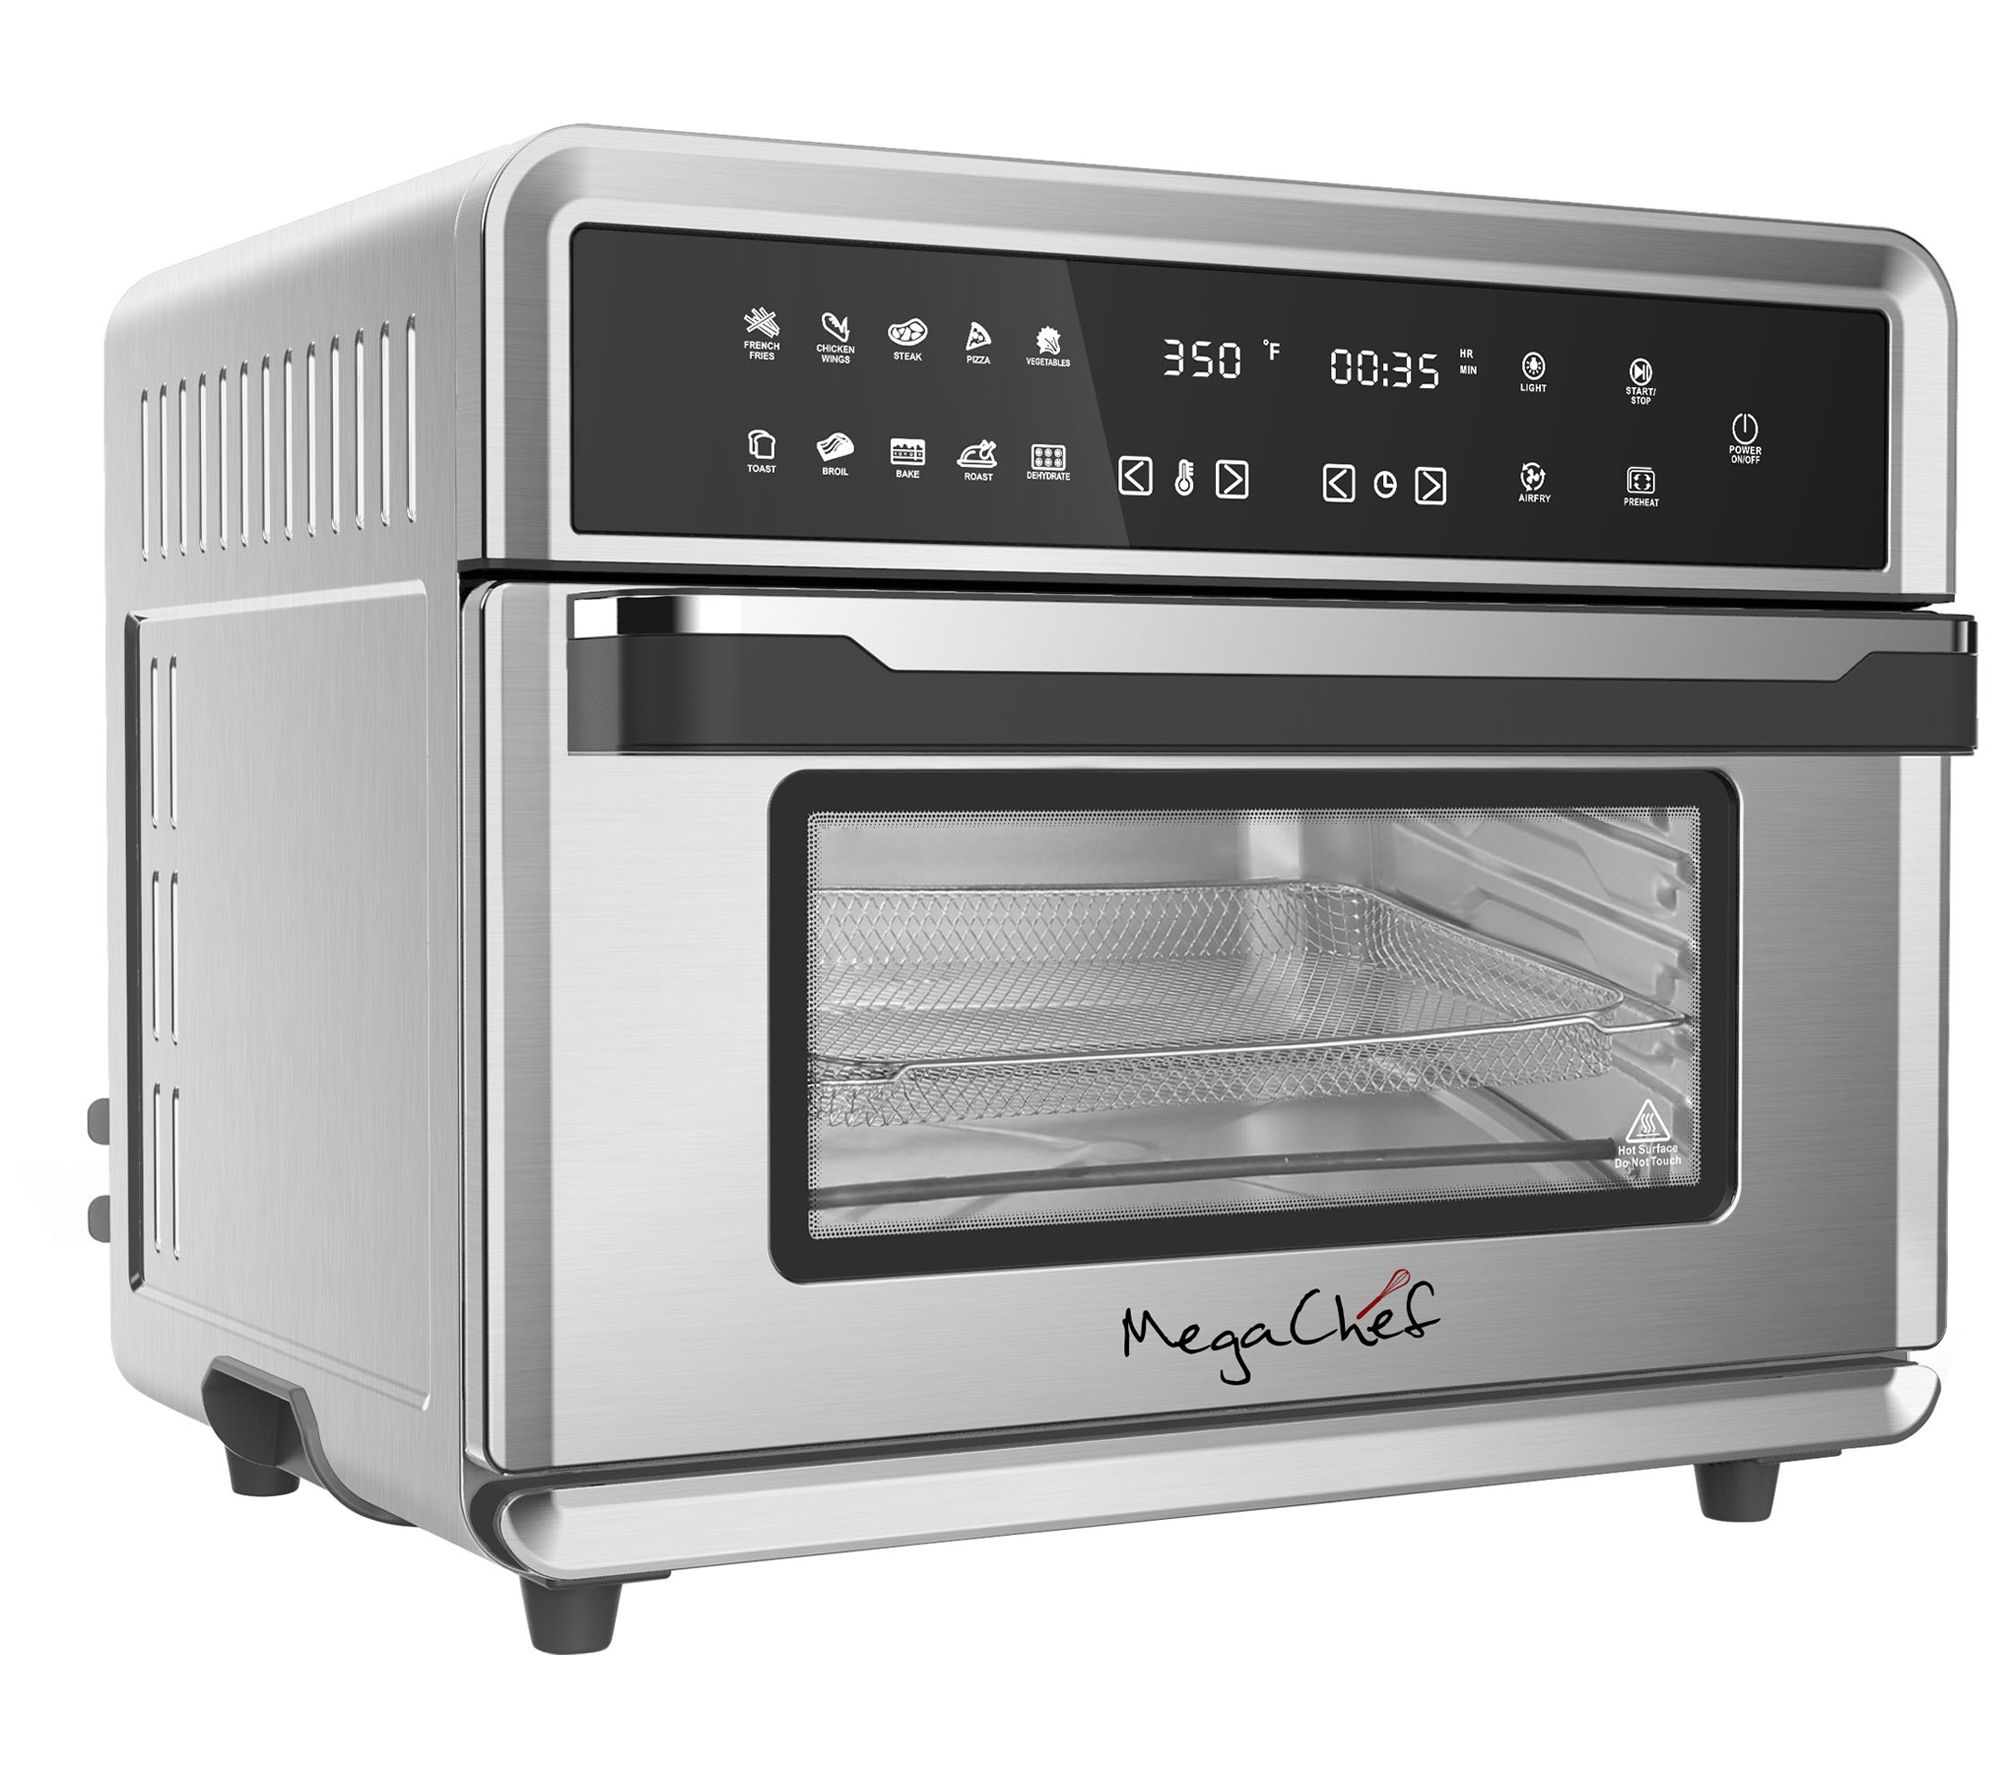 QVC Ninja 12-in-1 Rapid Cook & Convection Double Oven 329.98